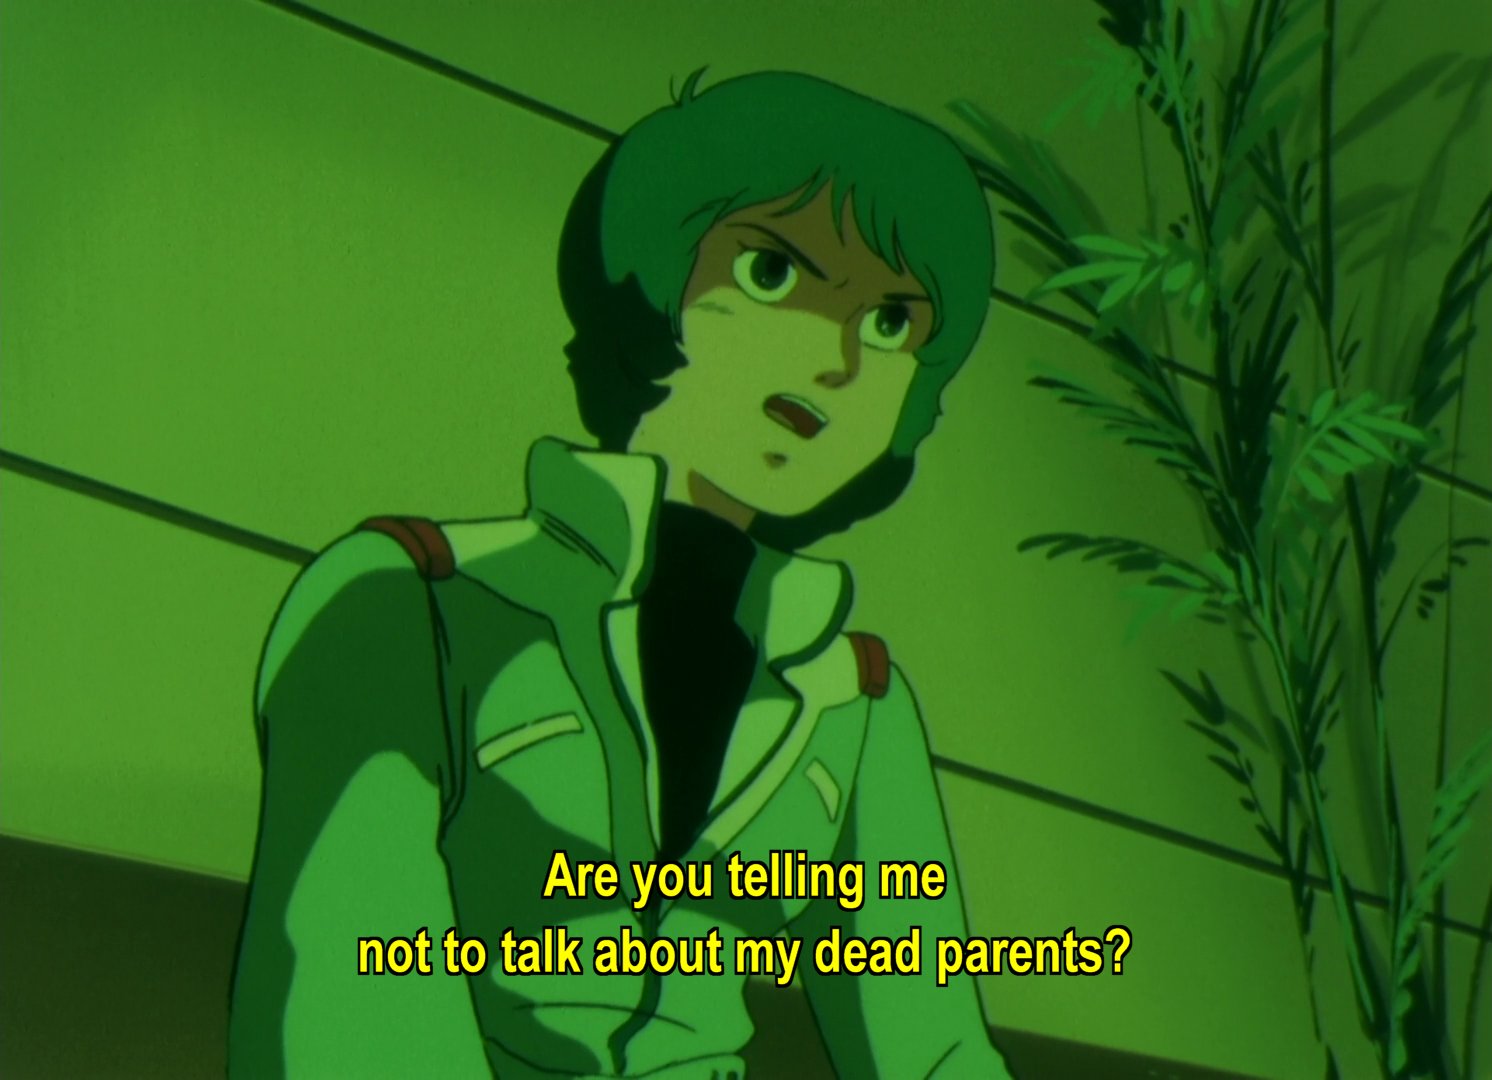 Kamille, angry: Are you telling me not to talk about my dead parents?